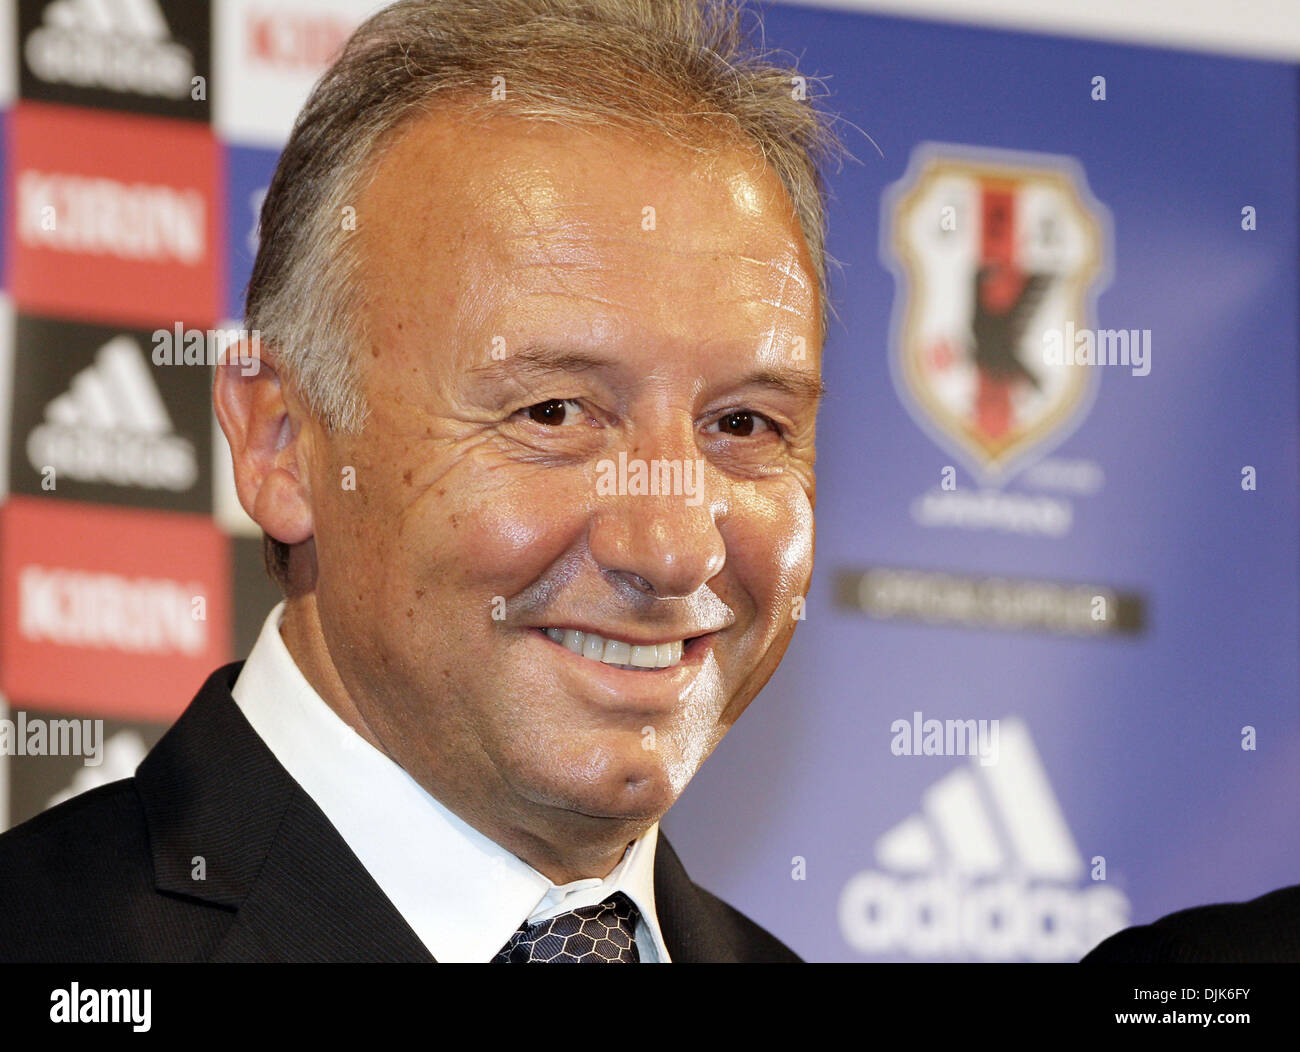 Aug 31, 2010 - Tokyo, Japan - Former AC Milan coach ALBERTO ZACCHERONI attends a press conference announcing of his appointment as Japan's national football coach in Tokyo, Japan. Zaccheroni is to coach the national team to prepare for the next World Cup.  (Credit Image: © Junko Kimura/Jana/ZUMApress.com) Stock Photo